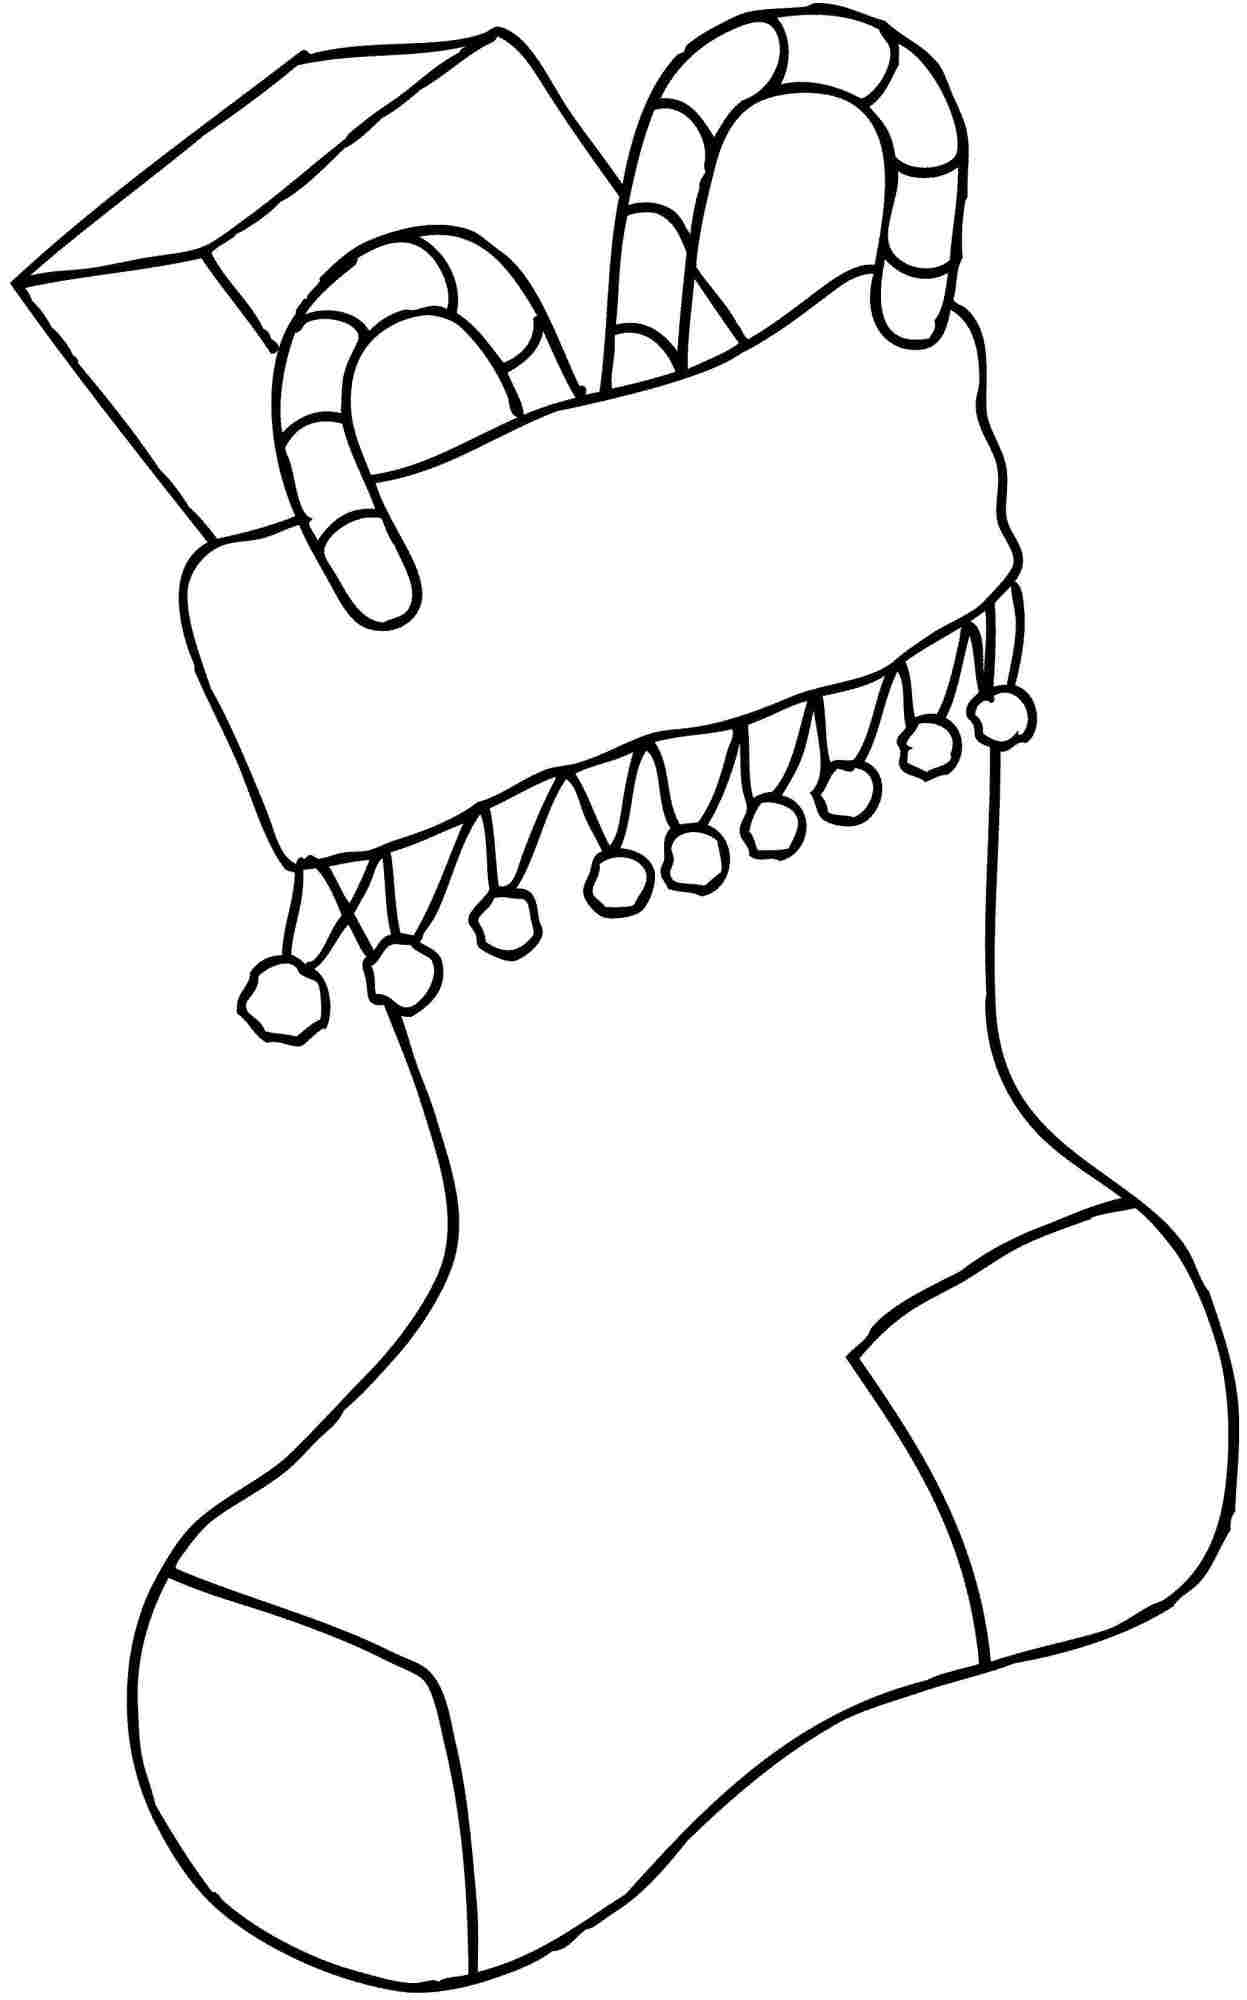 Plain Christmas Stocking Coloring Pages at GetColorings.com | Free ...